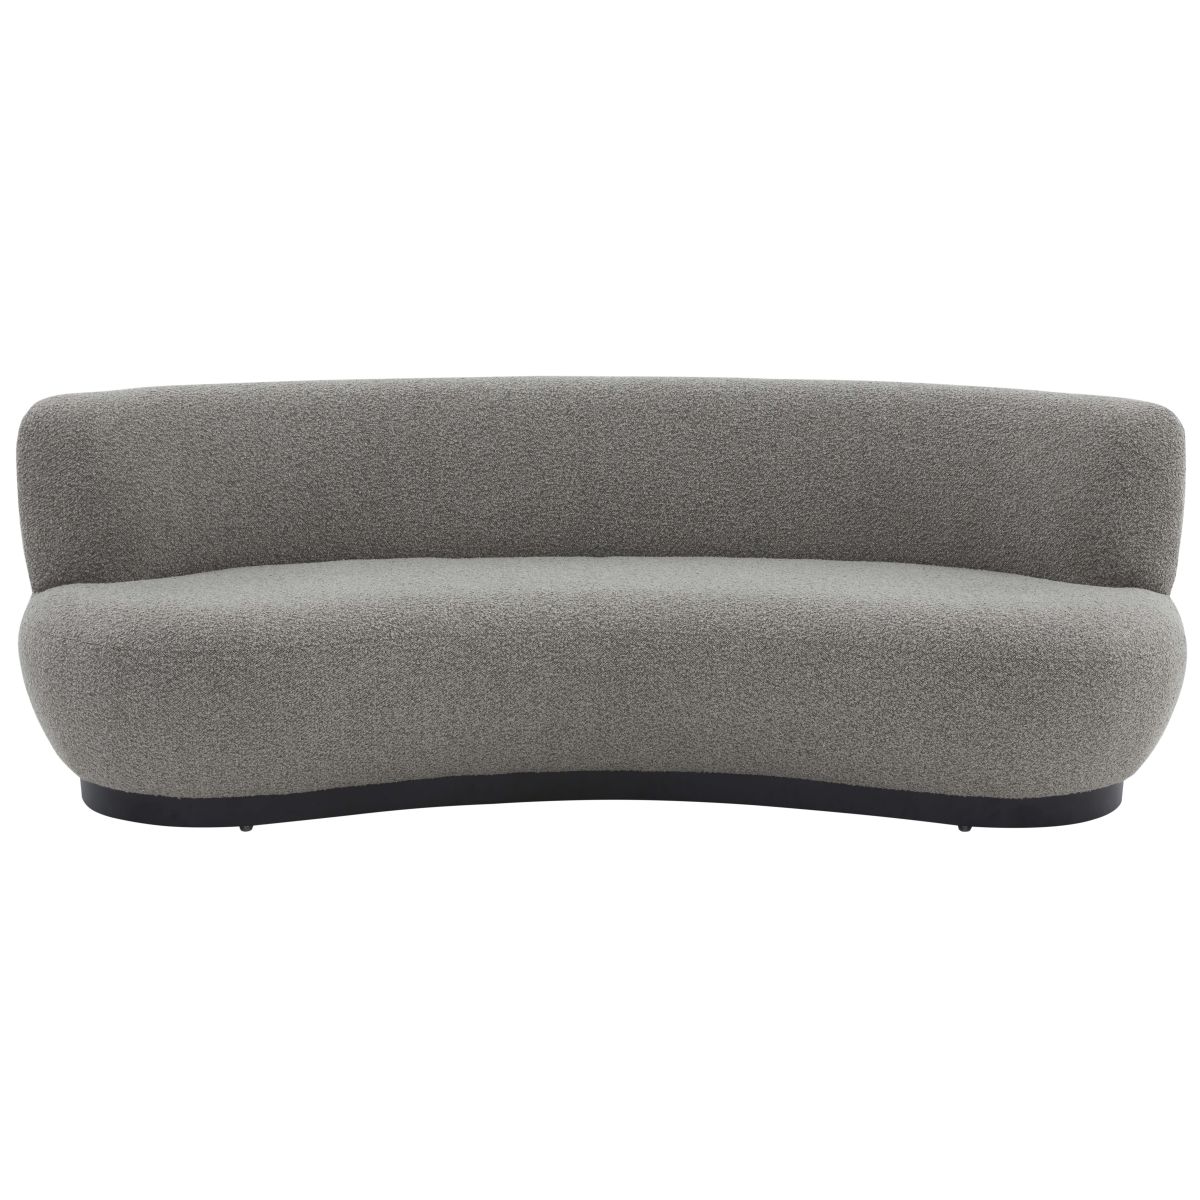 Safavieh Couture Stevie Boucle Curved Back Sofa - Light Grey / Black